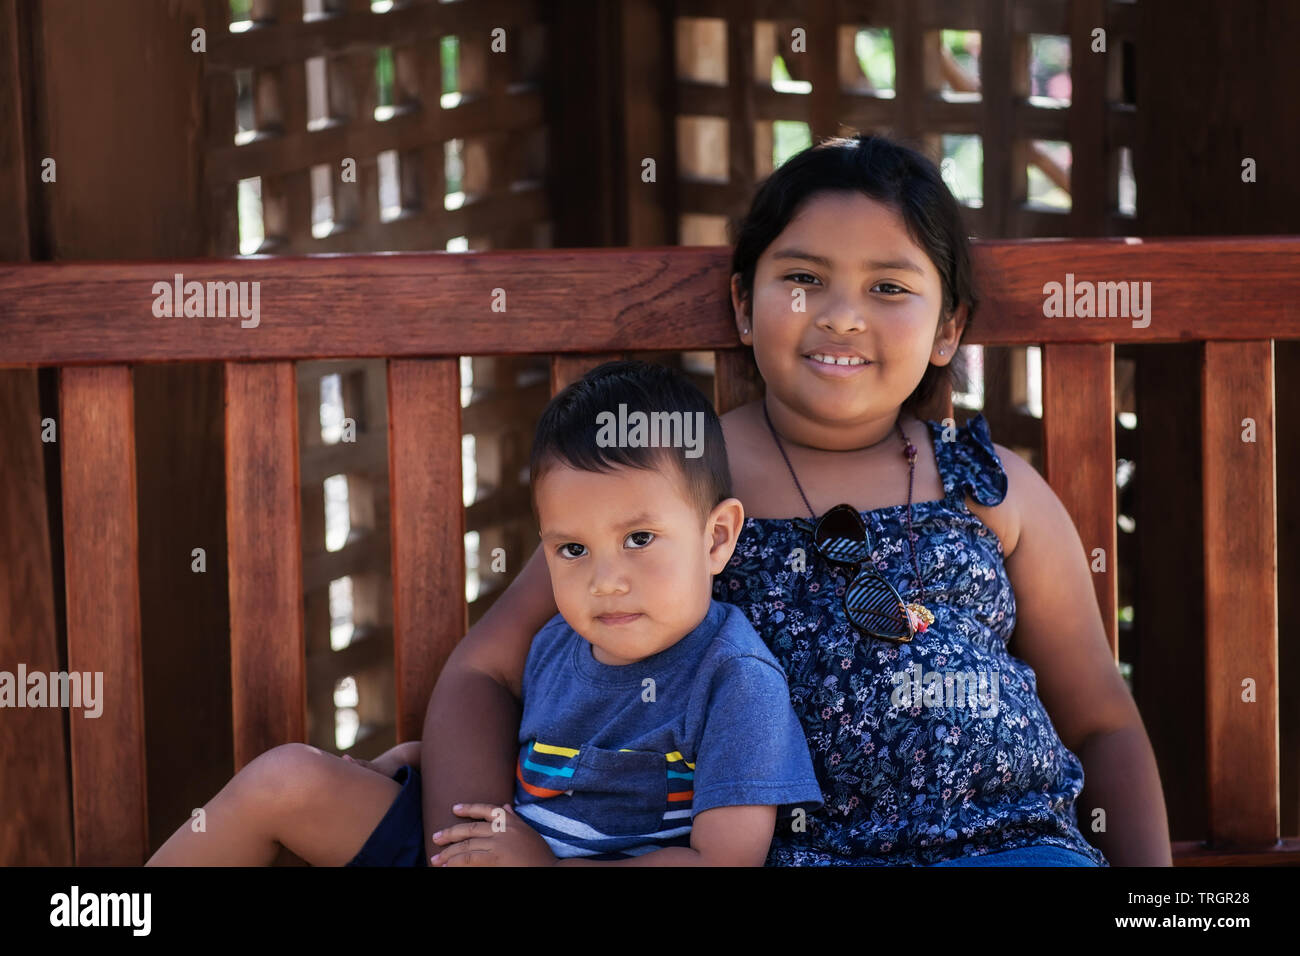 Little brother sitting next to his older sister in a wooden bench. Stock Photo